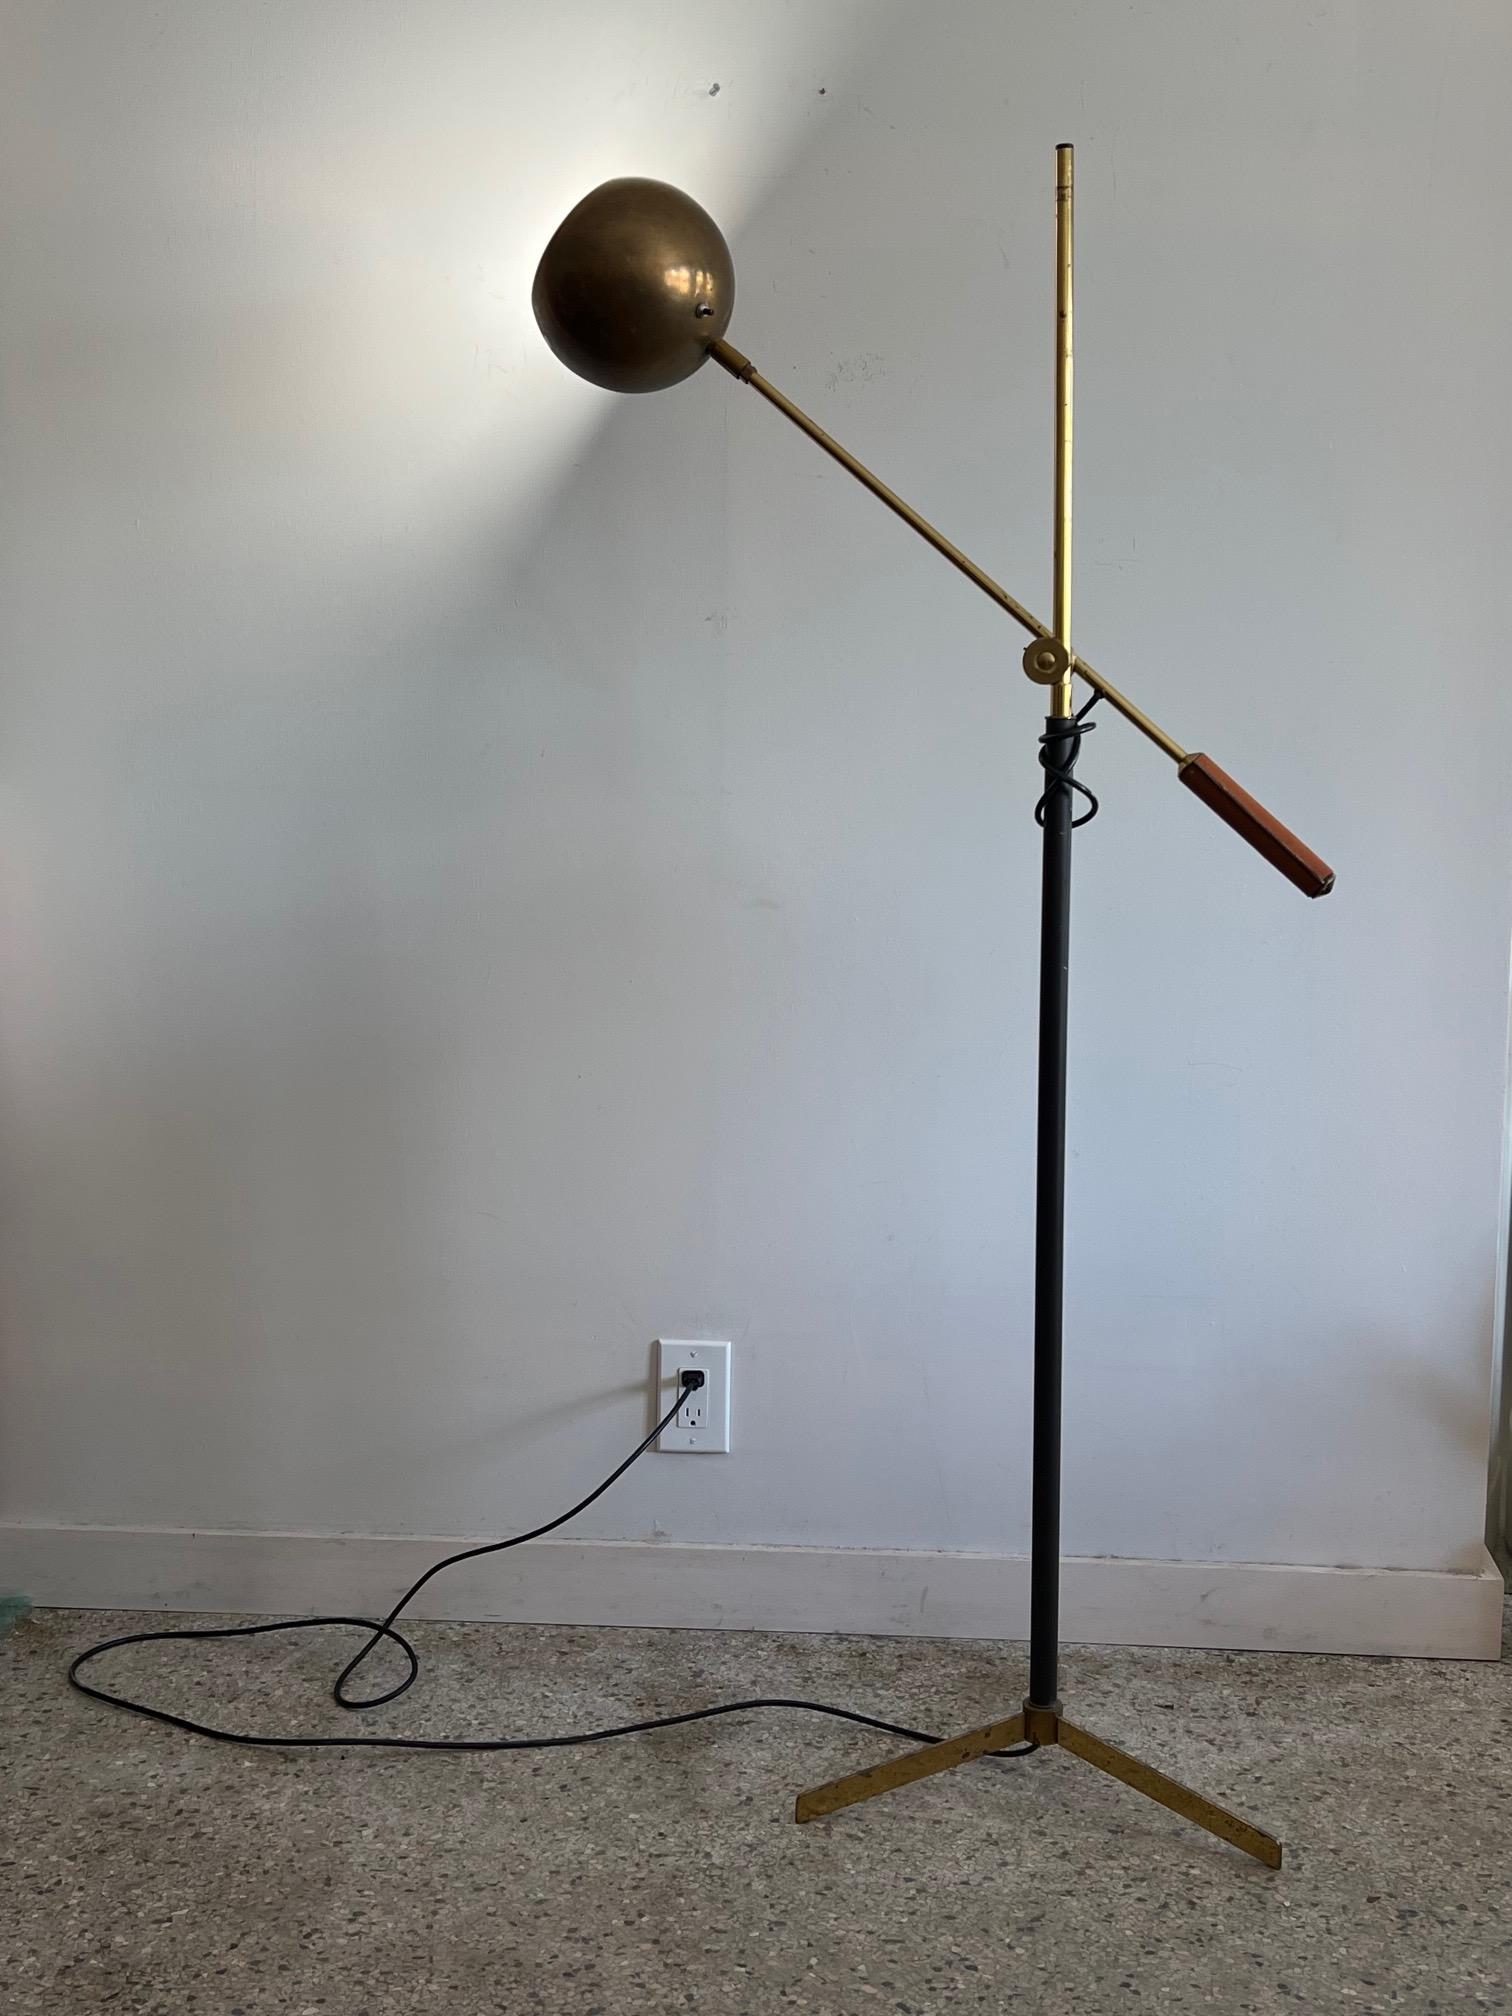 A Classic articulating reading or task lamp manufactured by Koch & Lowy, in the style of Arteluce or Arredoluce. Leather covered handle, brass shade and pole. Nicely detailed.